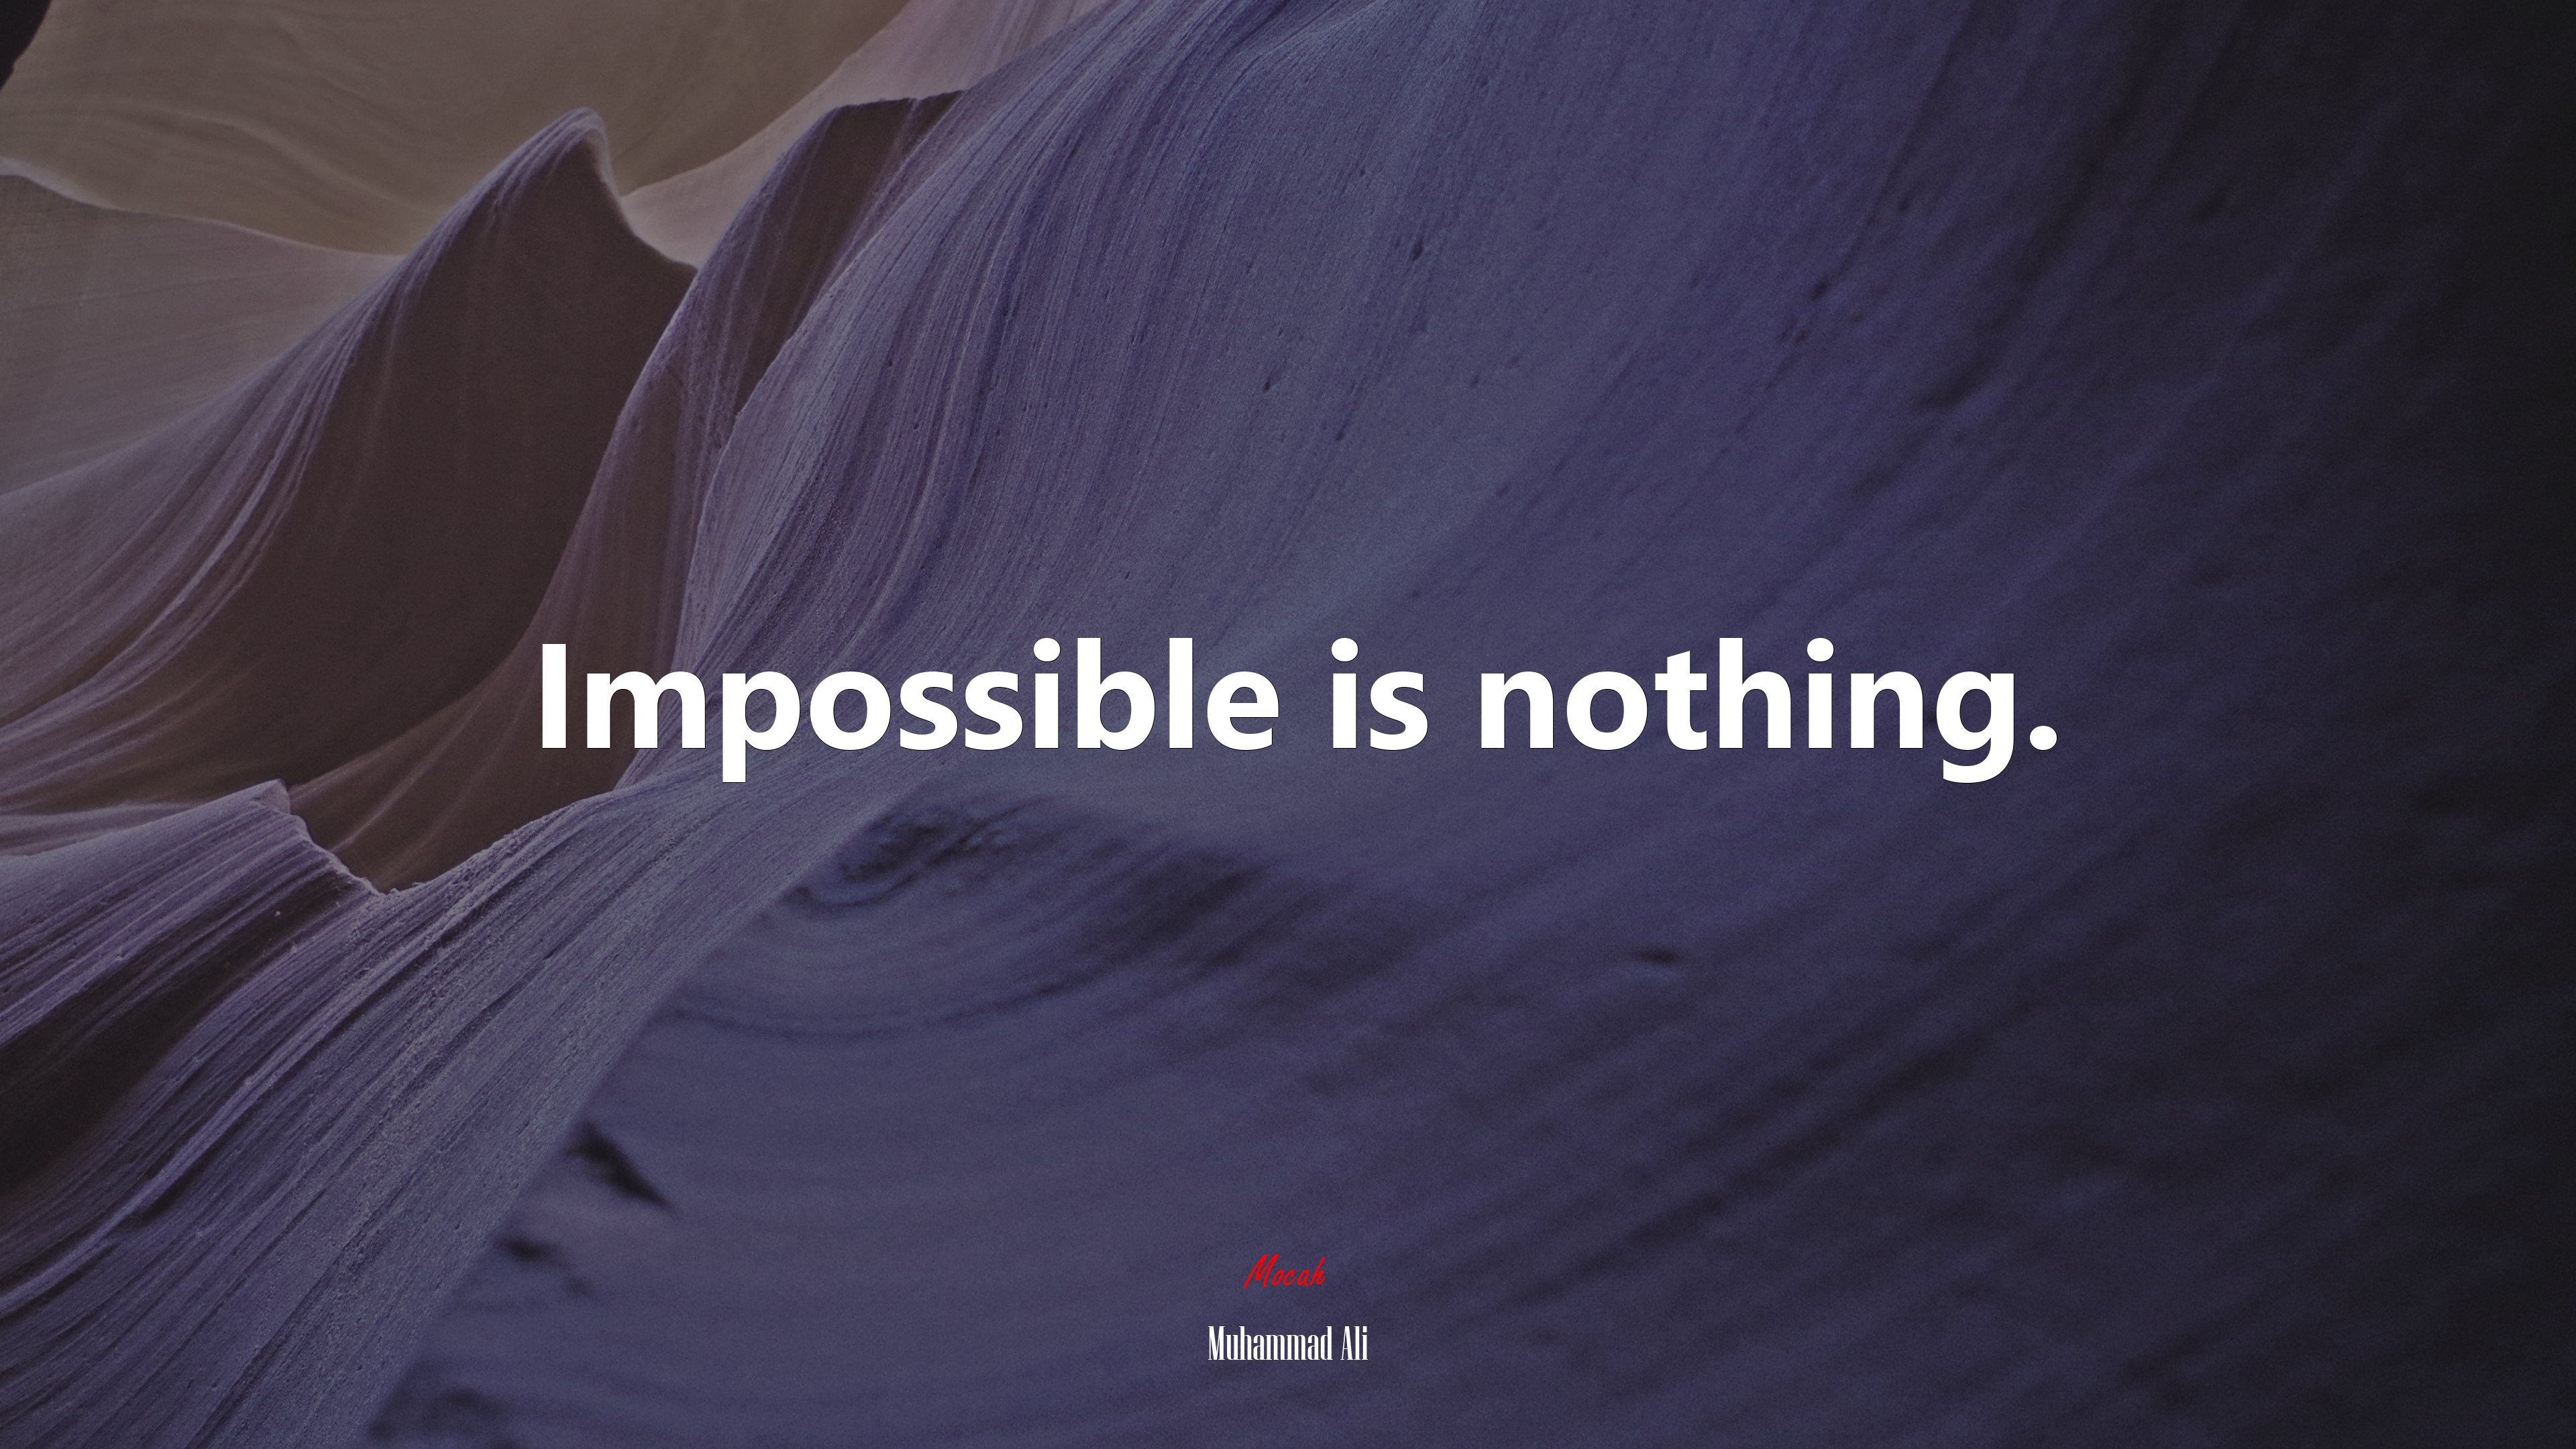 24+] Impossible Is Nothing Wallpapers - WallpaperSafari